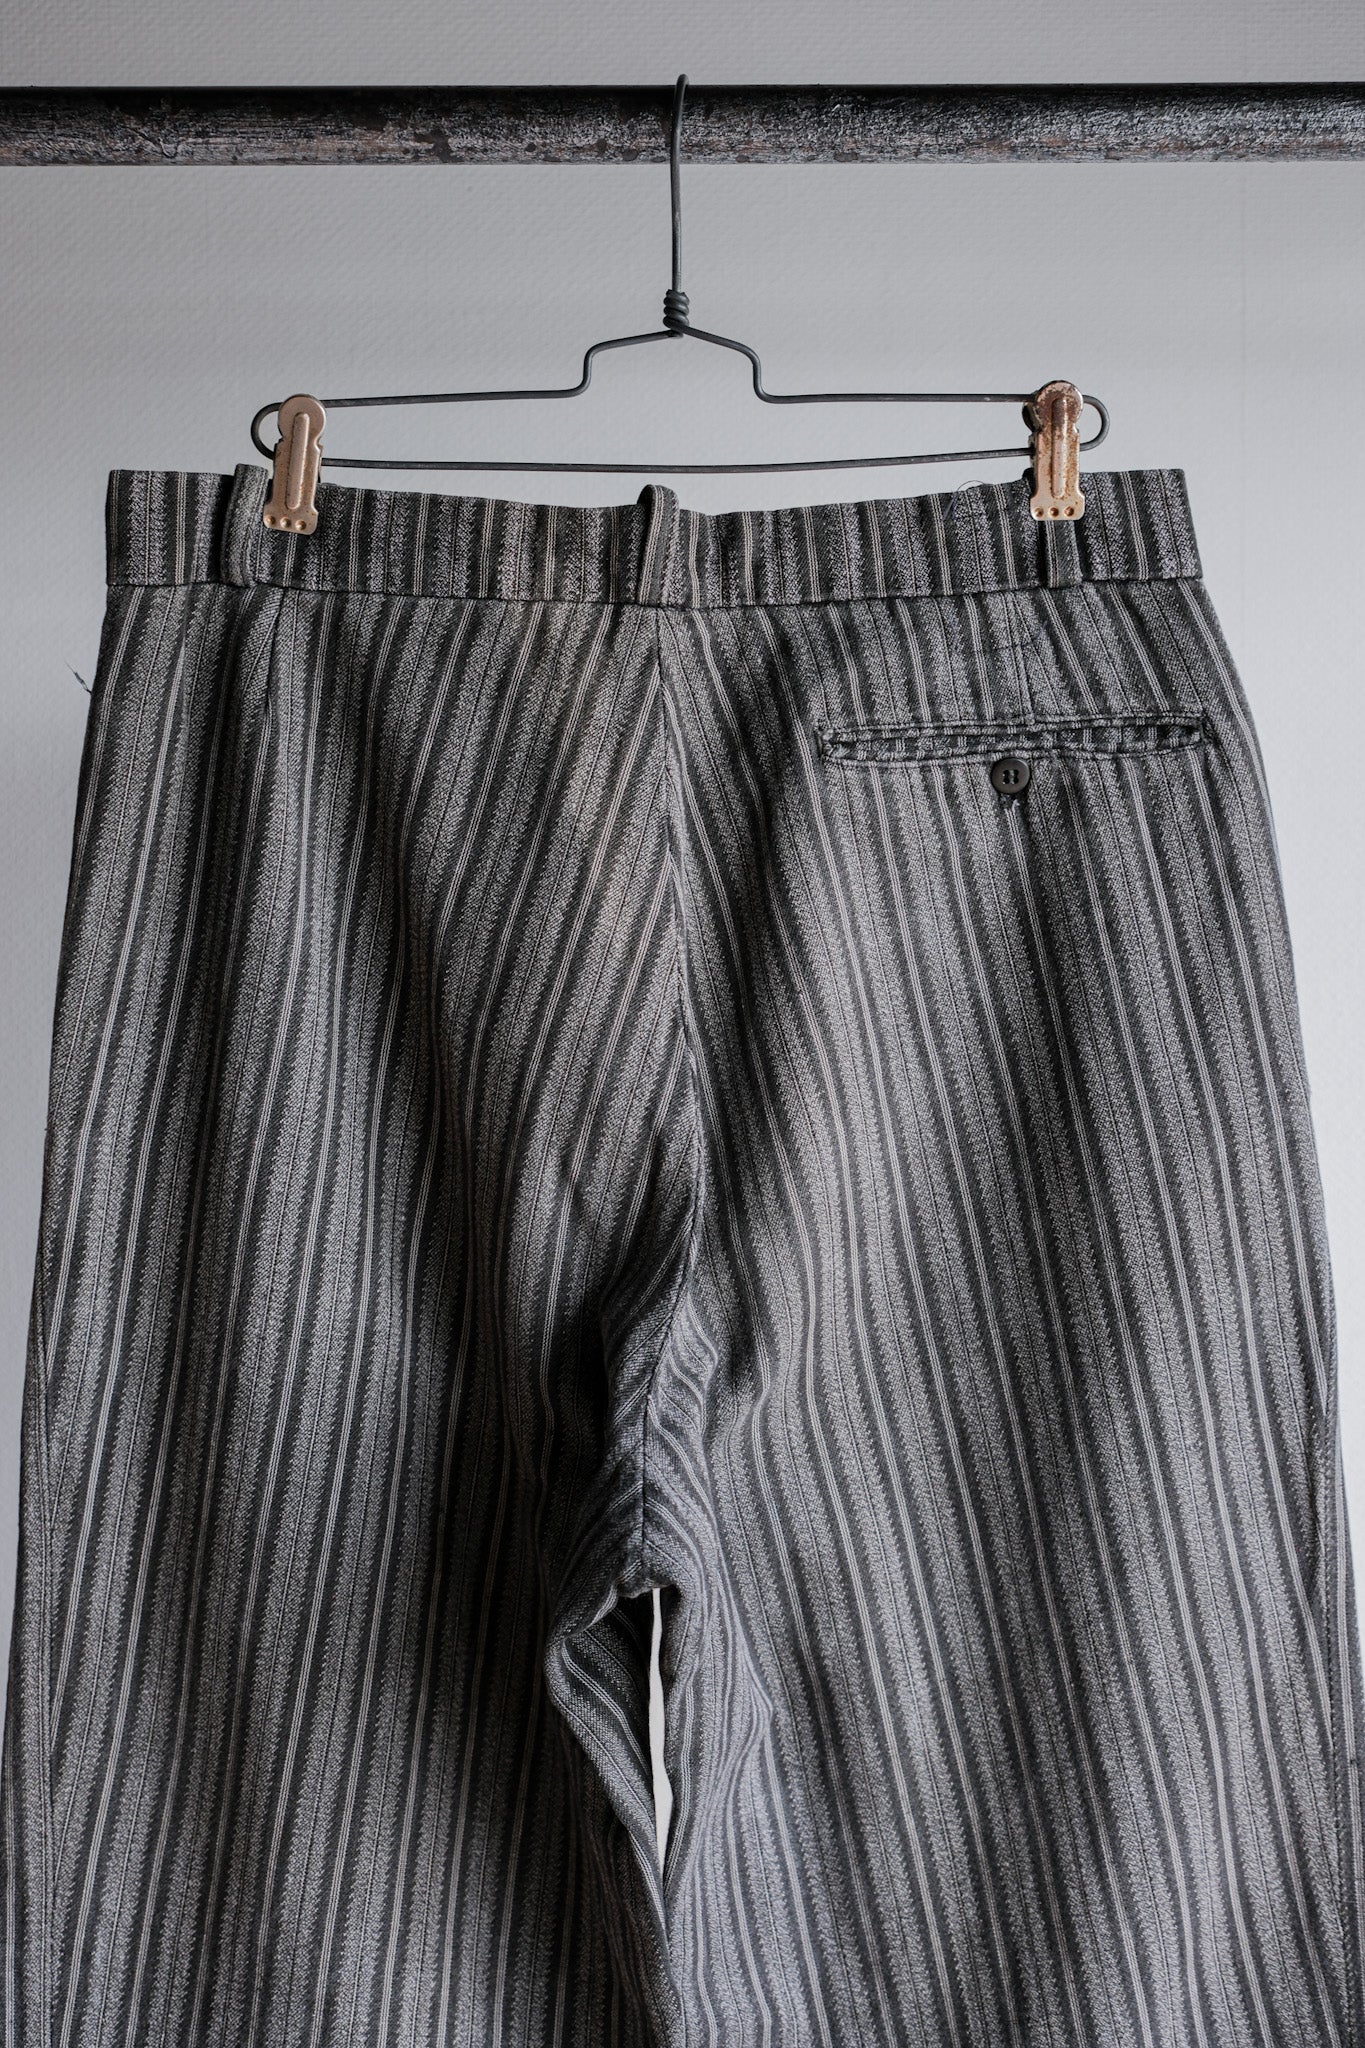 [~ 50's] French Vintage 2 TUCK Cotton Striped Work Pants